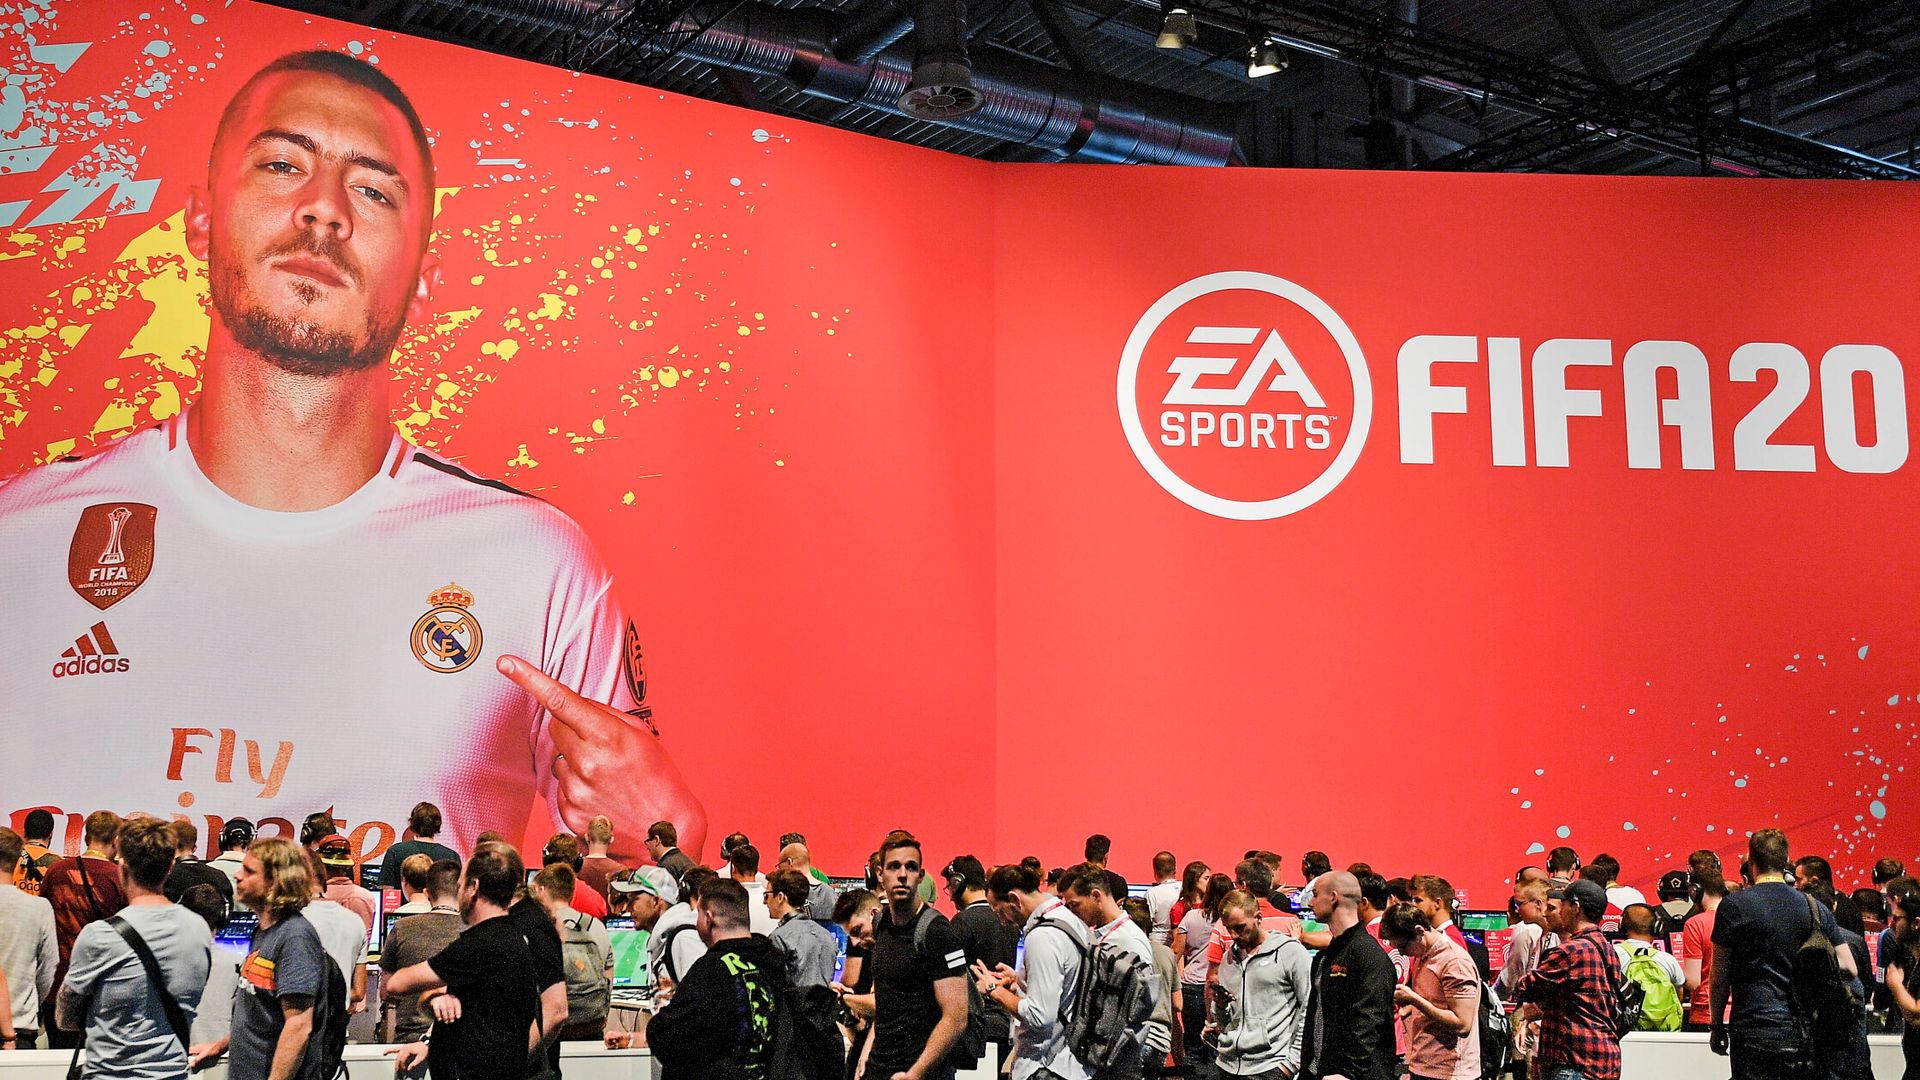 FIFA player ratings 'correlate with racial stereotypes', study claims